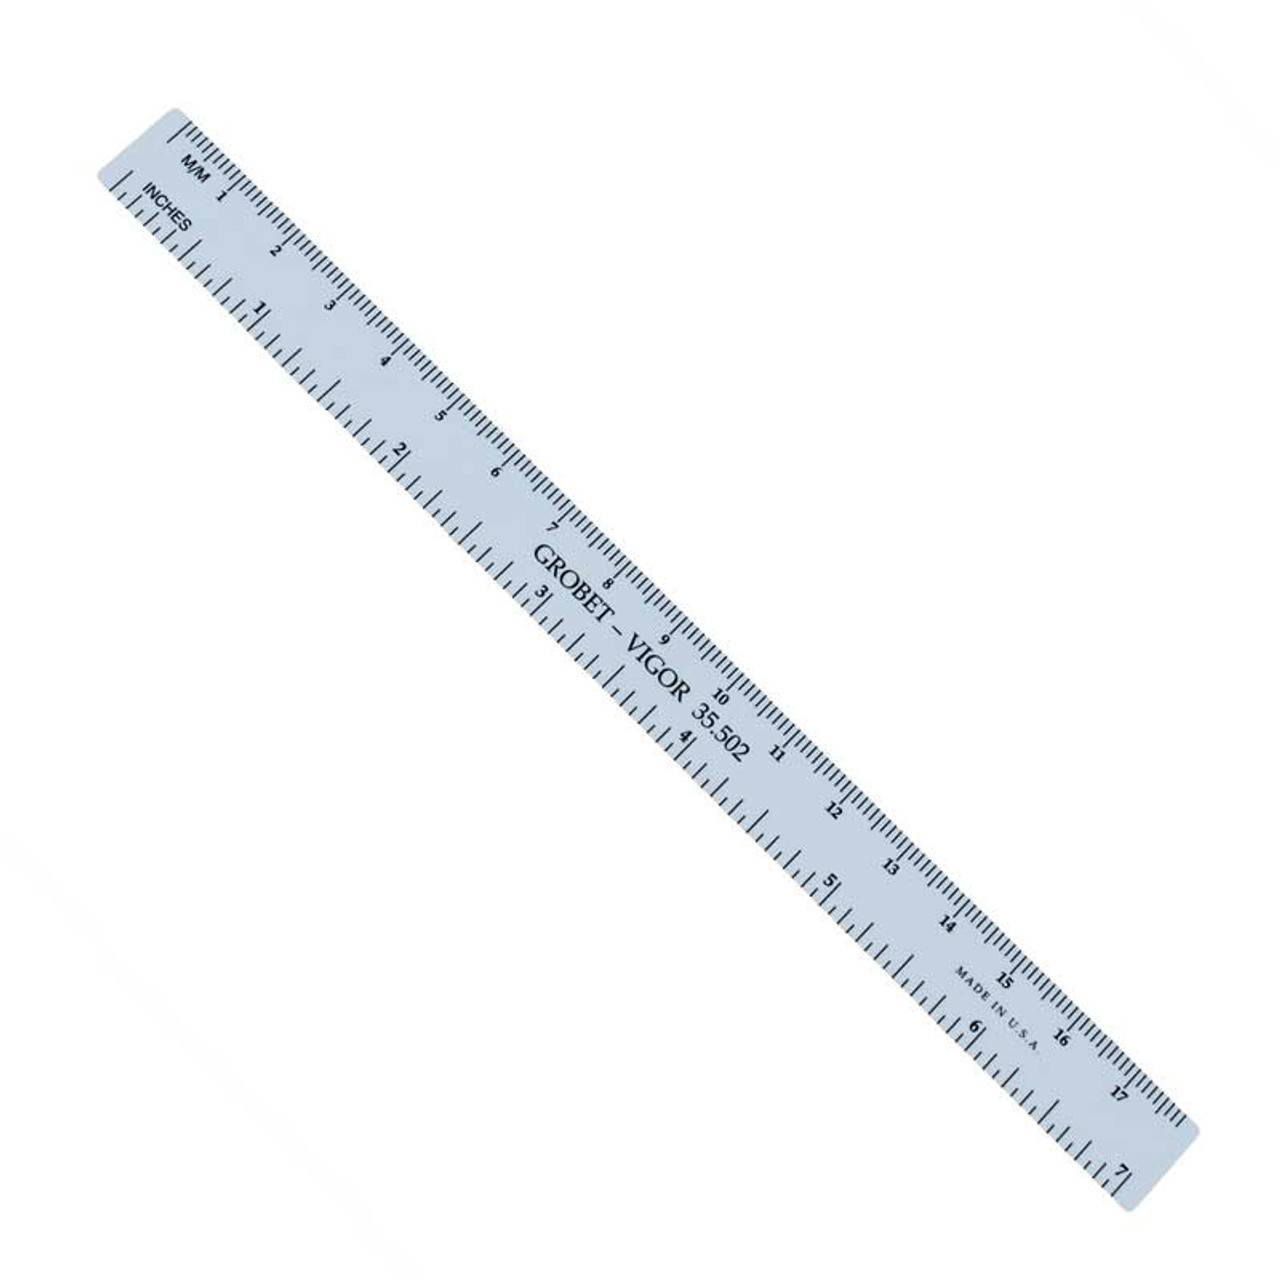 where-are-millimeters-on-a-ruler-wooden-metre-cm-mm-ruler-he350161